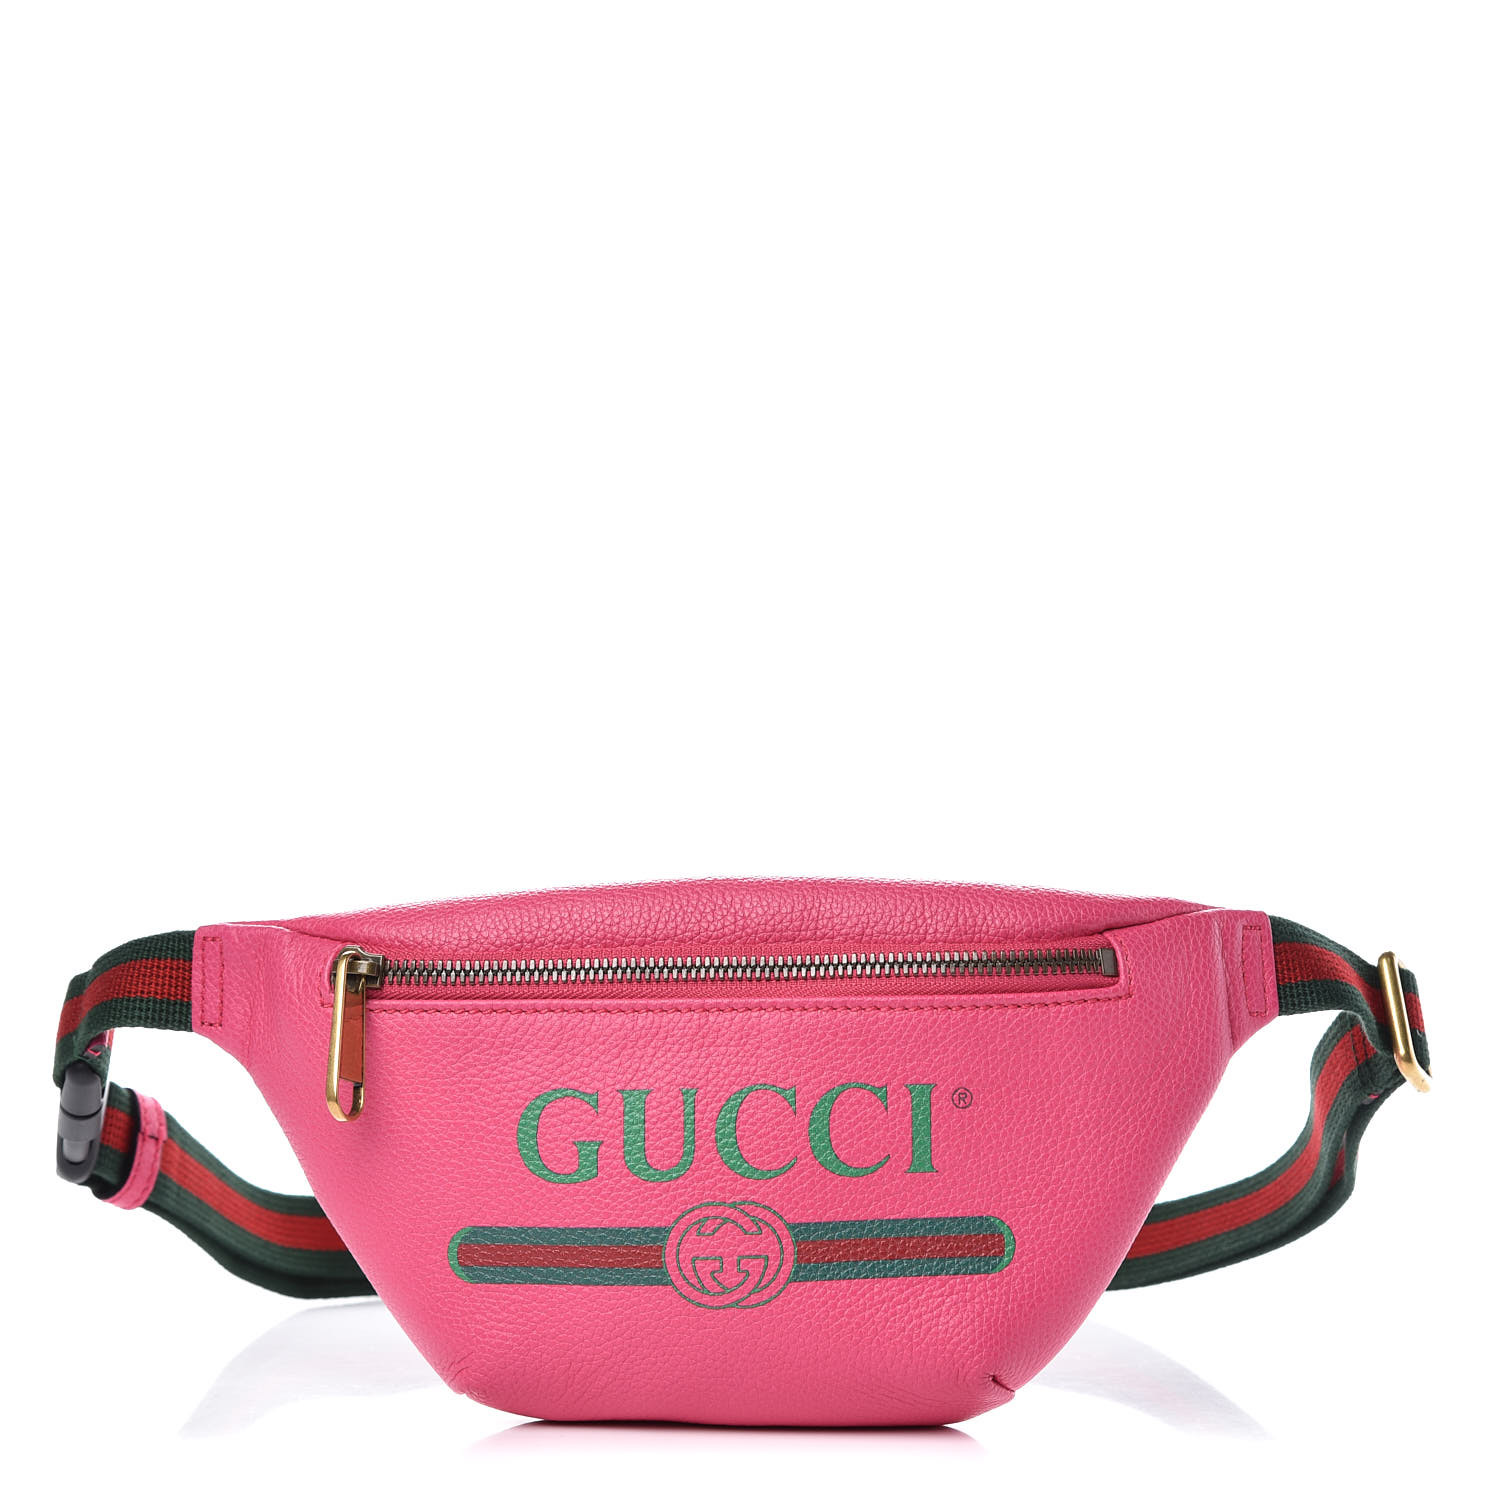 pink fanny pack gucci